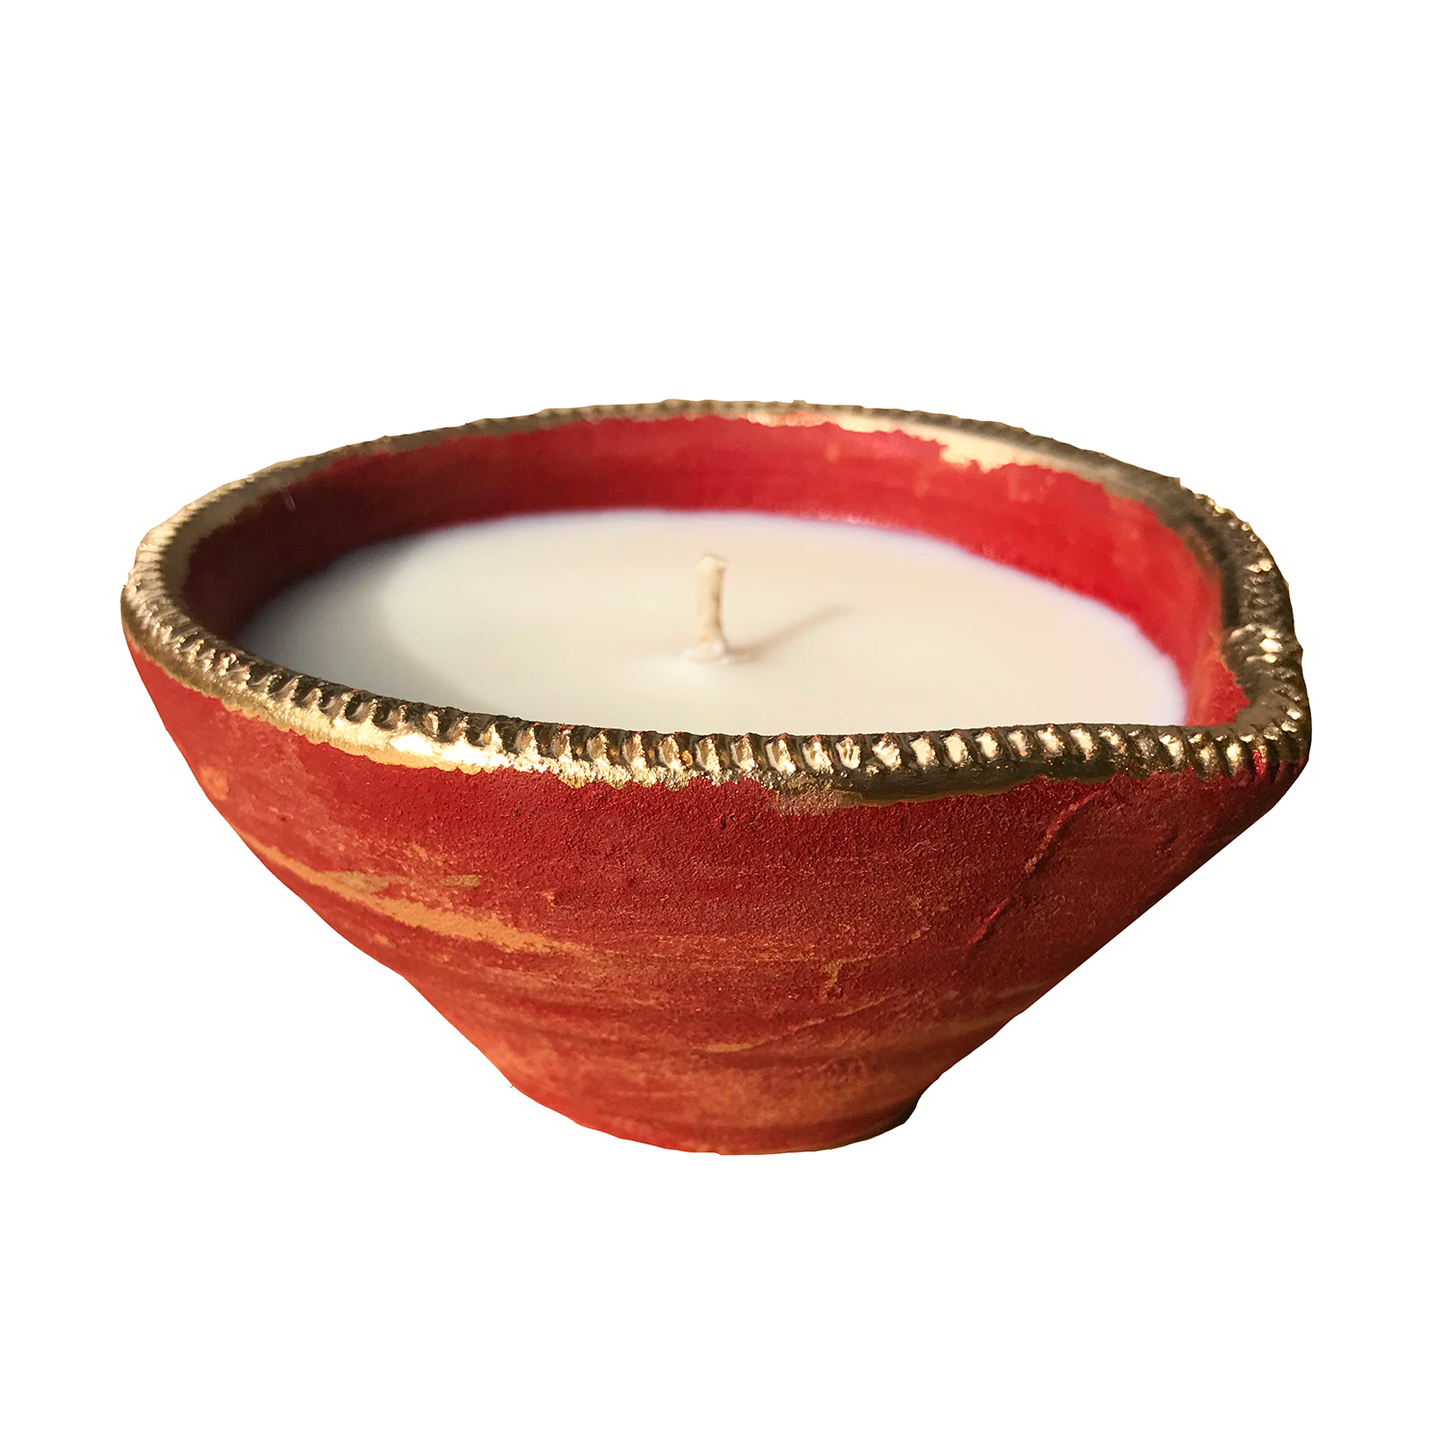 Ceramic Candle Earth Bowl by Chikiprana for Chapter Five